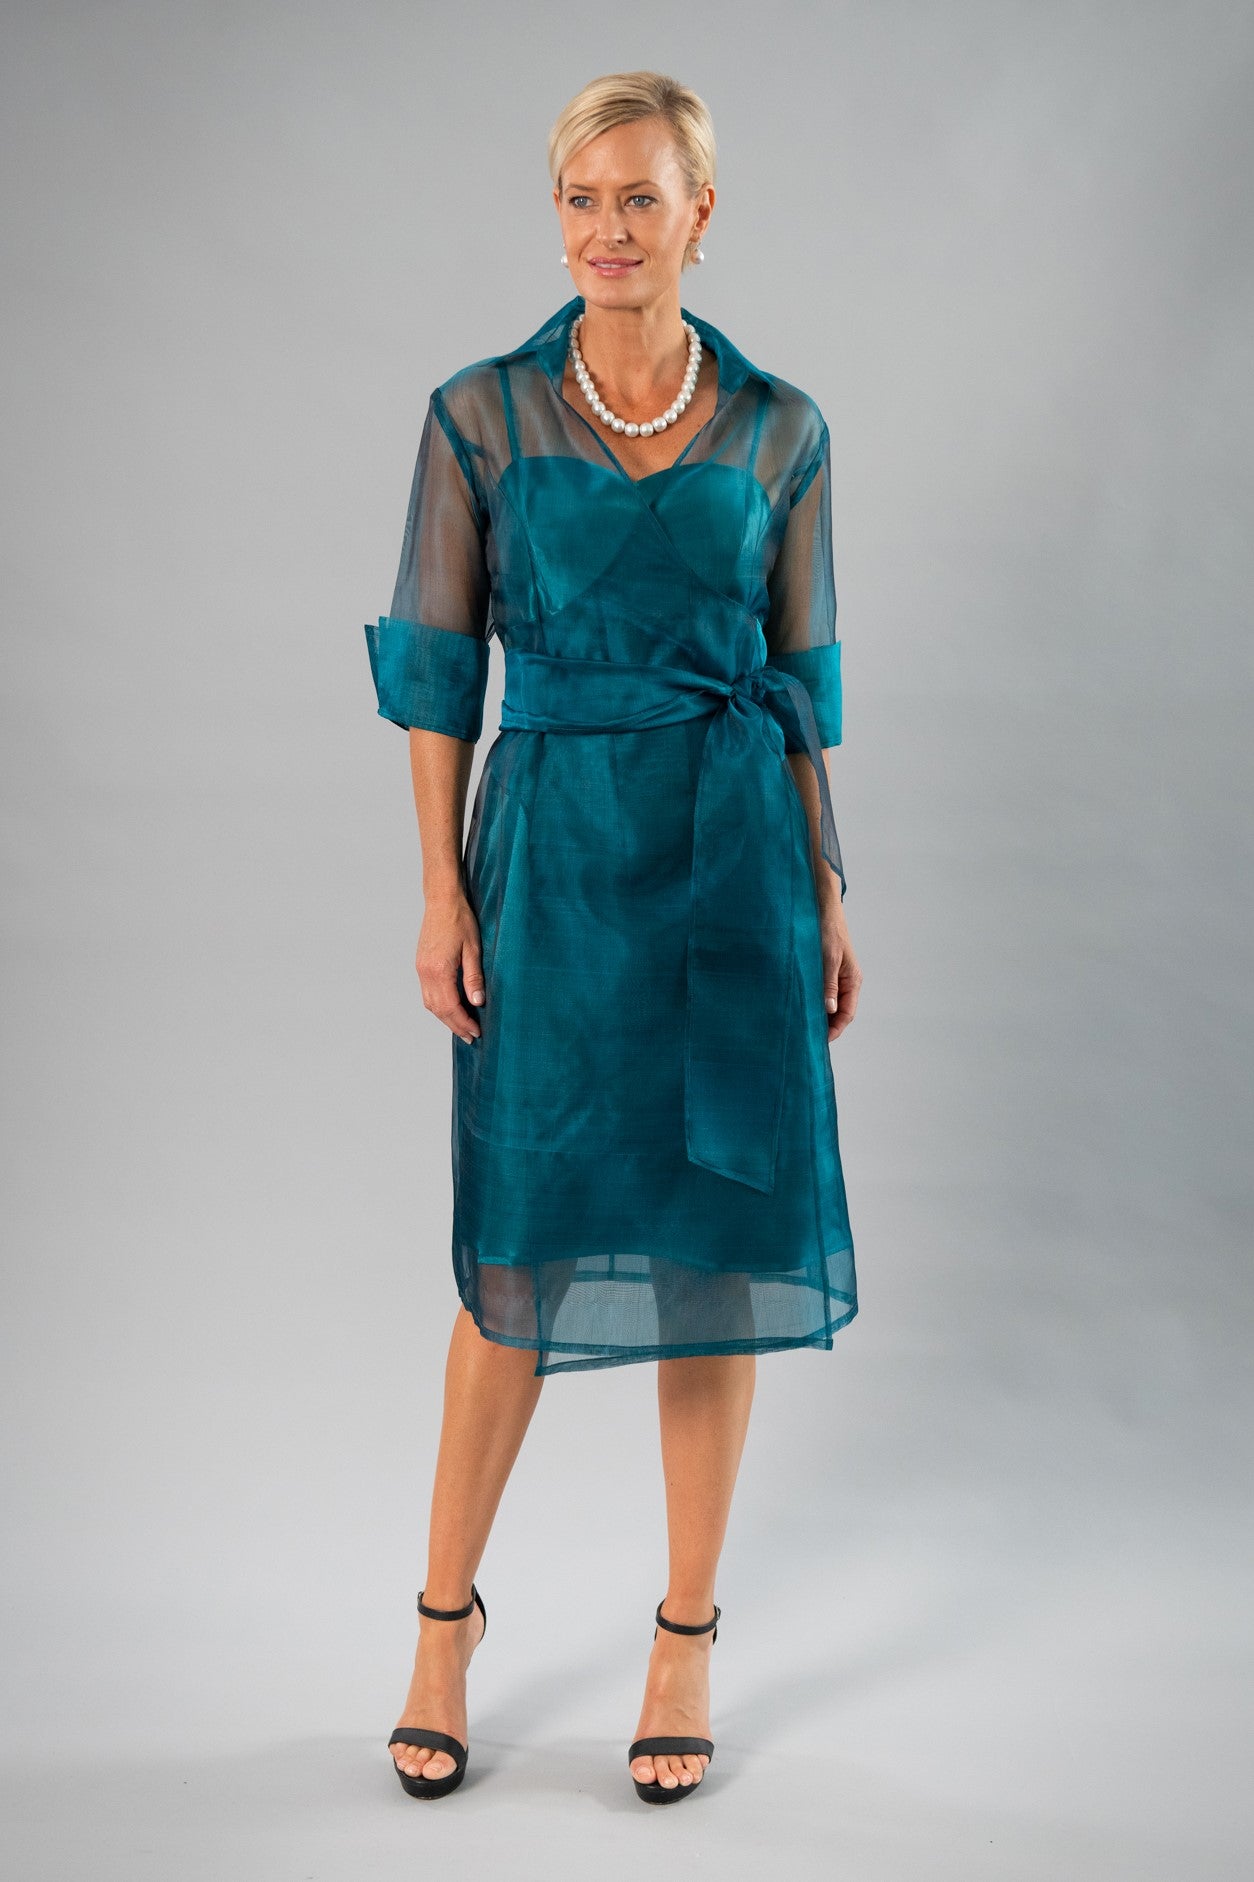 teal mother of the bride dress